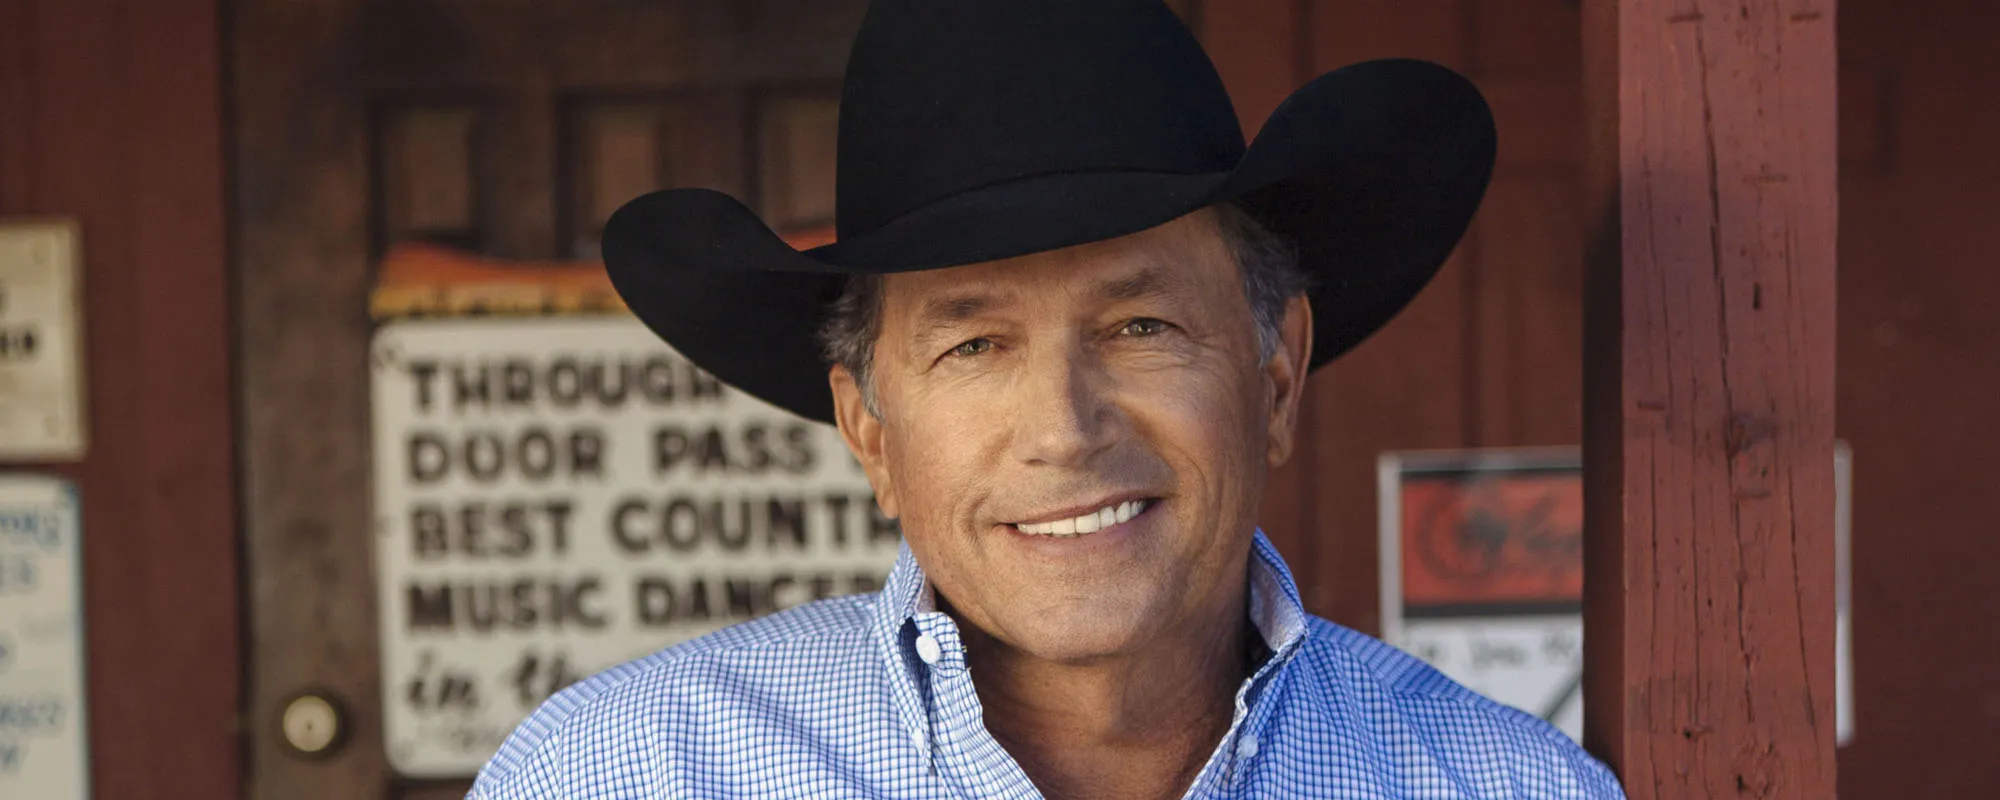 George Strait Wins First CMT Award for Performance of the Year